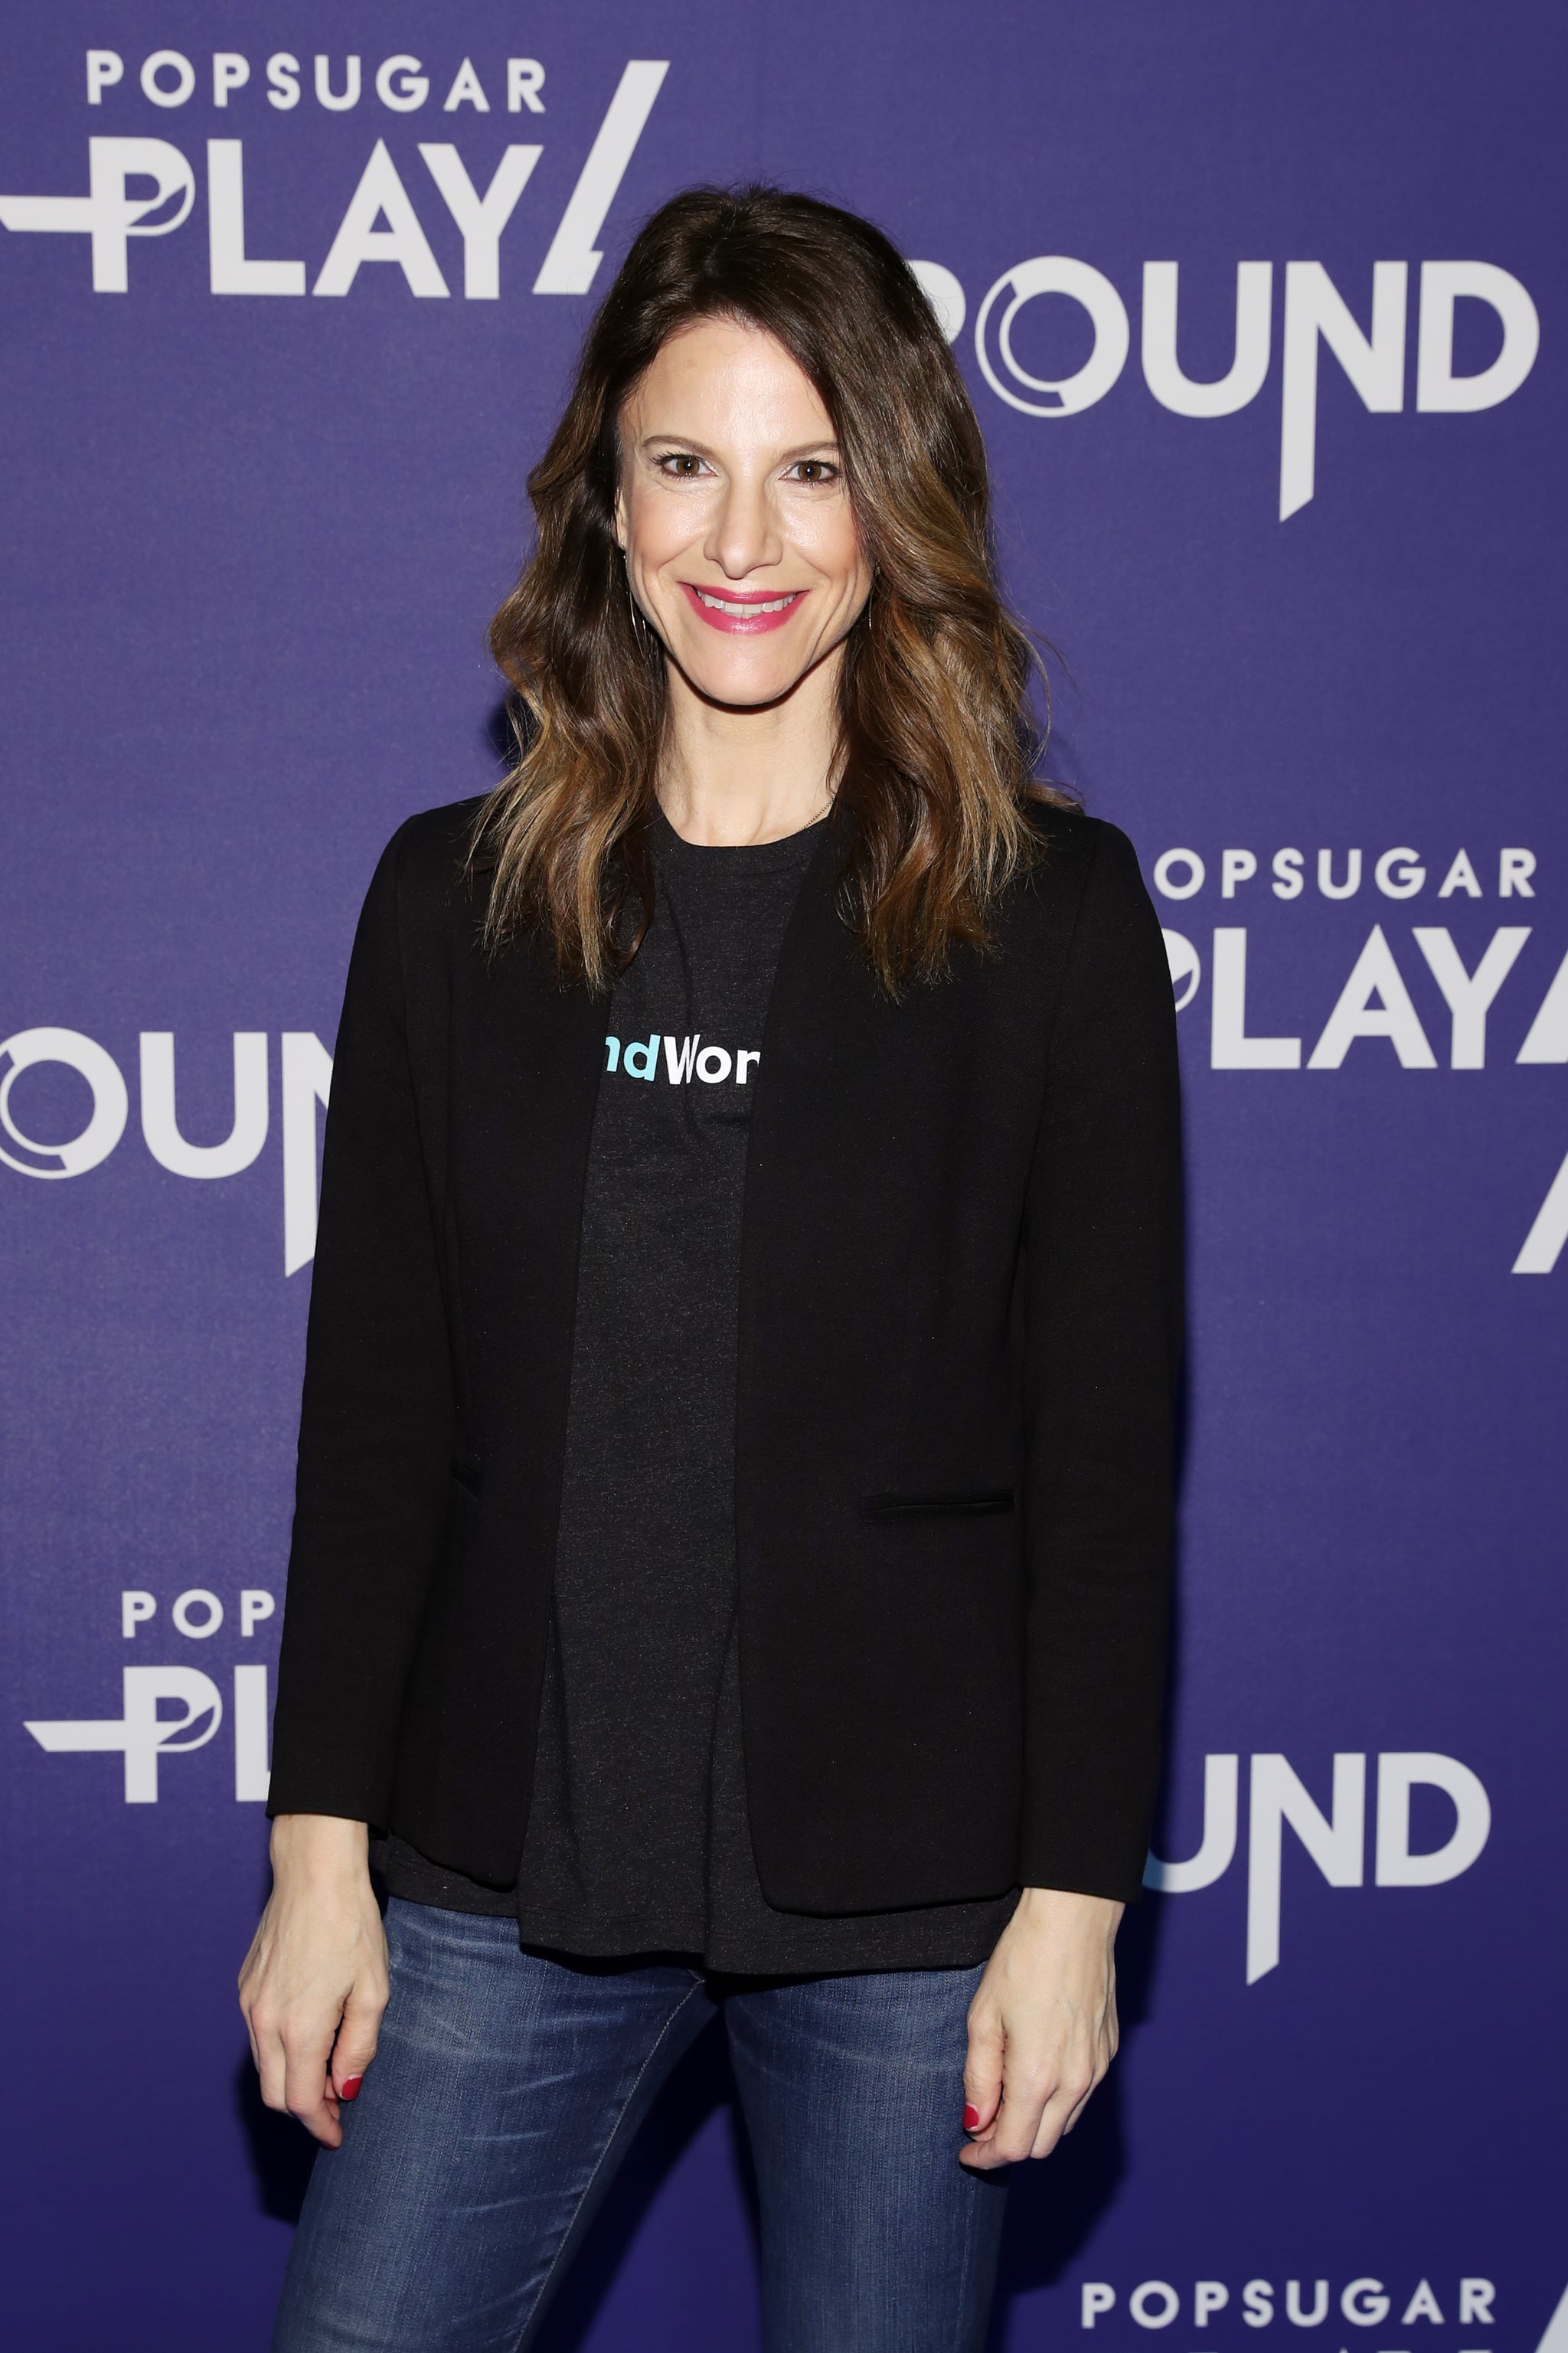 NEW YORK, NY - JUNE 09:  IFundWomen, Karen Cahn attends day 1 of POPSUGAR Play/Ground on June 9, 2018 in New York City.  (Photo by Cindy Ord/Getty Images  for POPSUGAR Play/Ground)